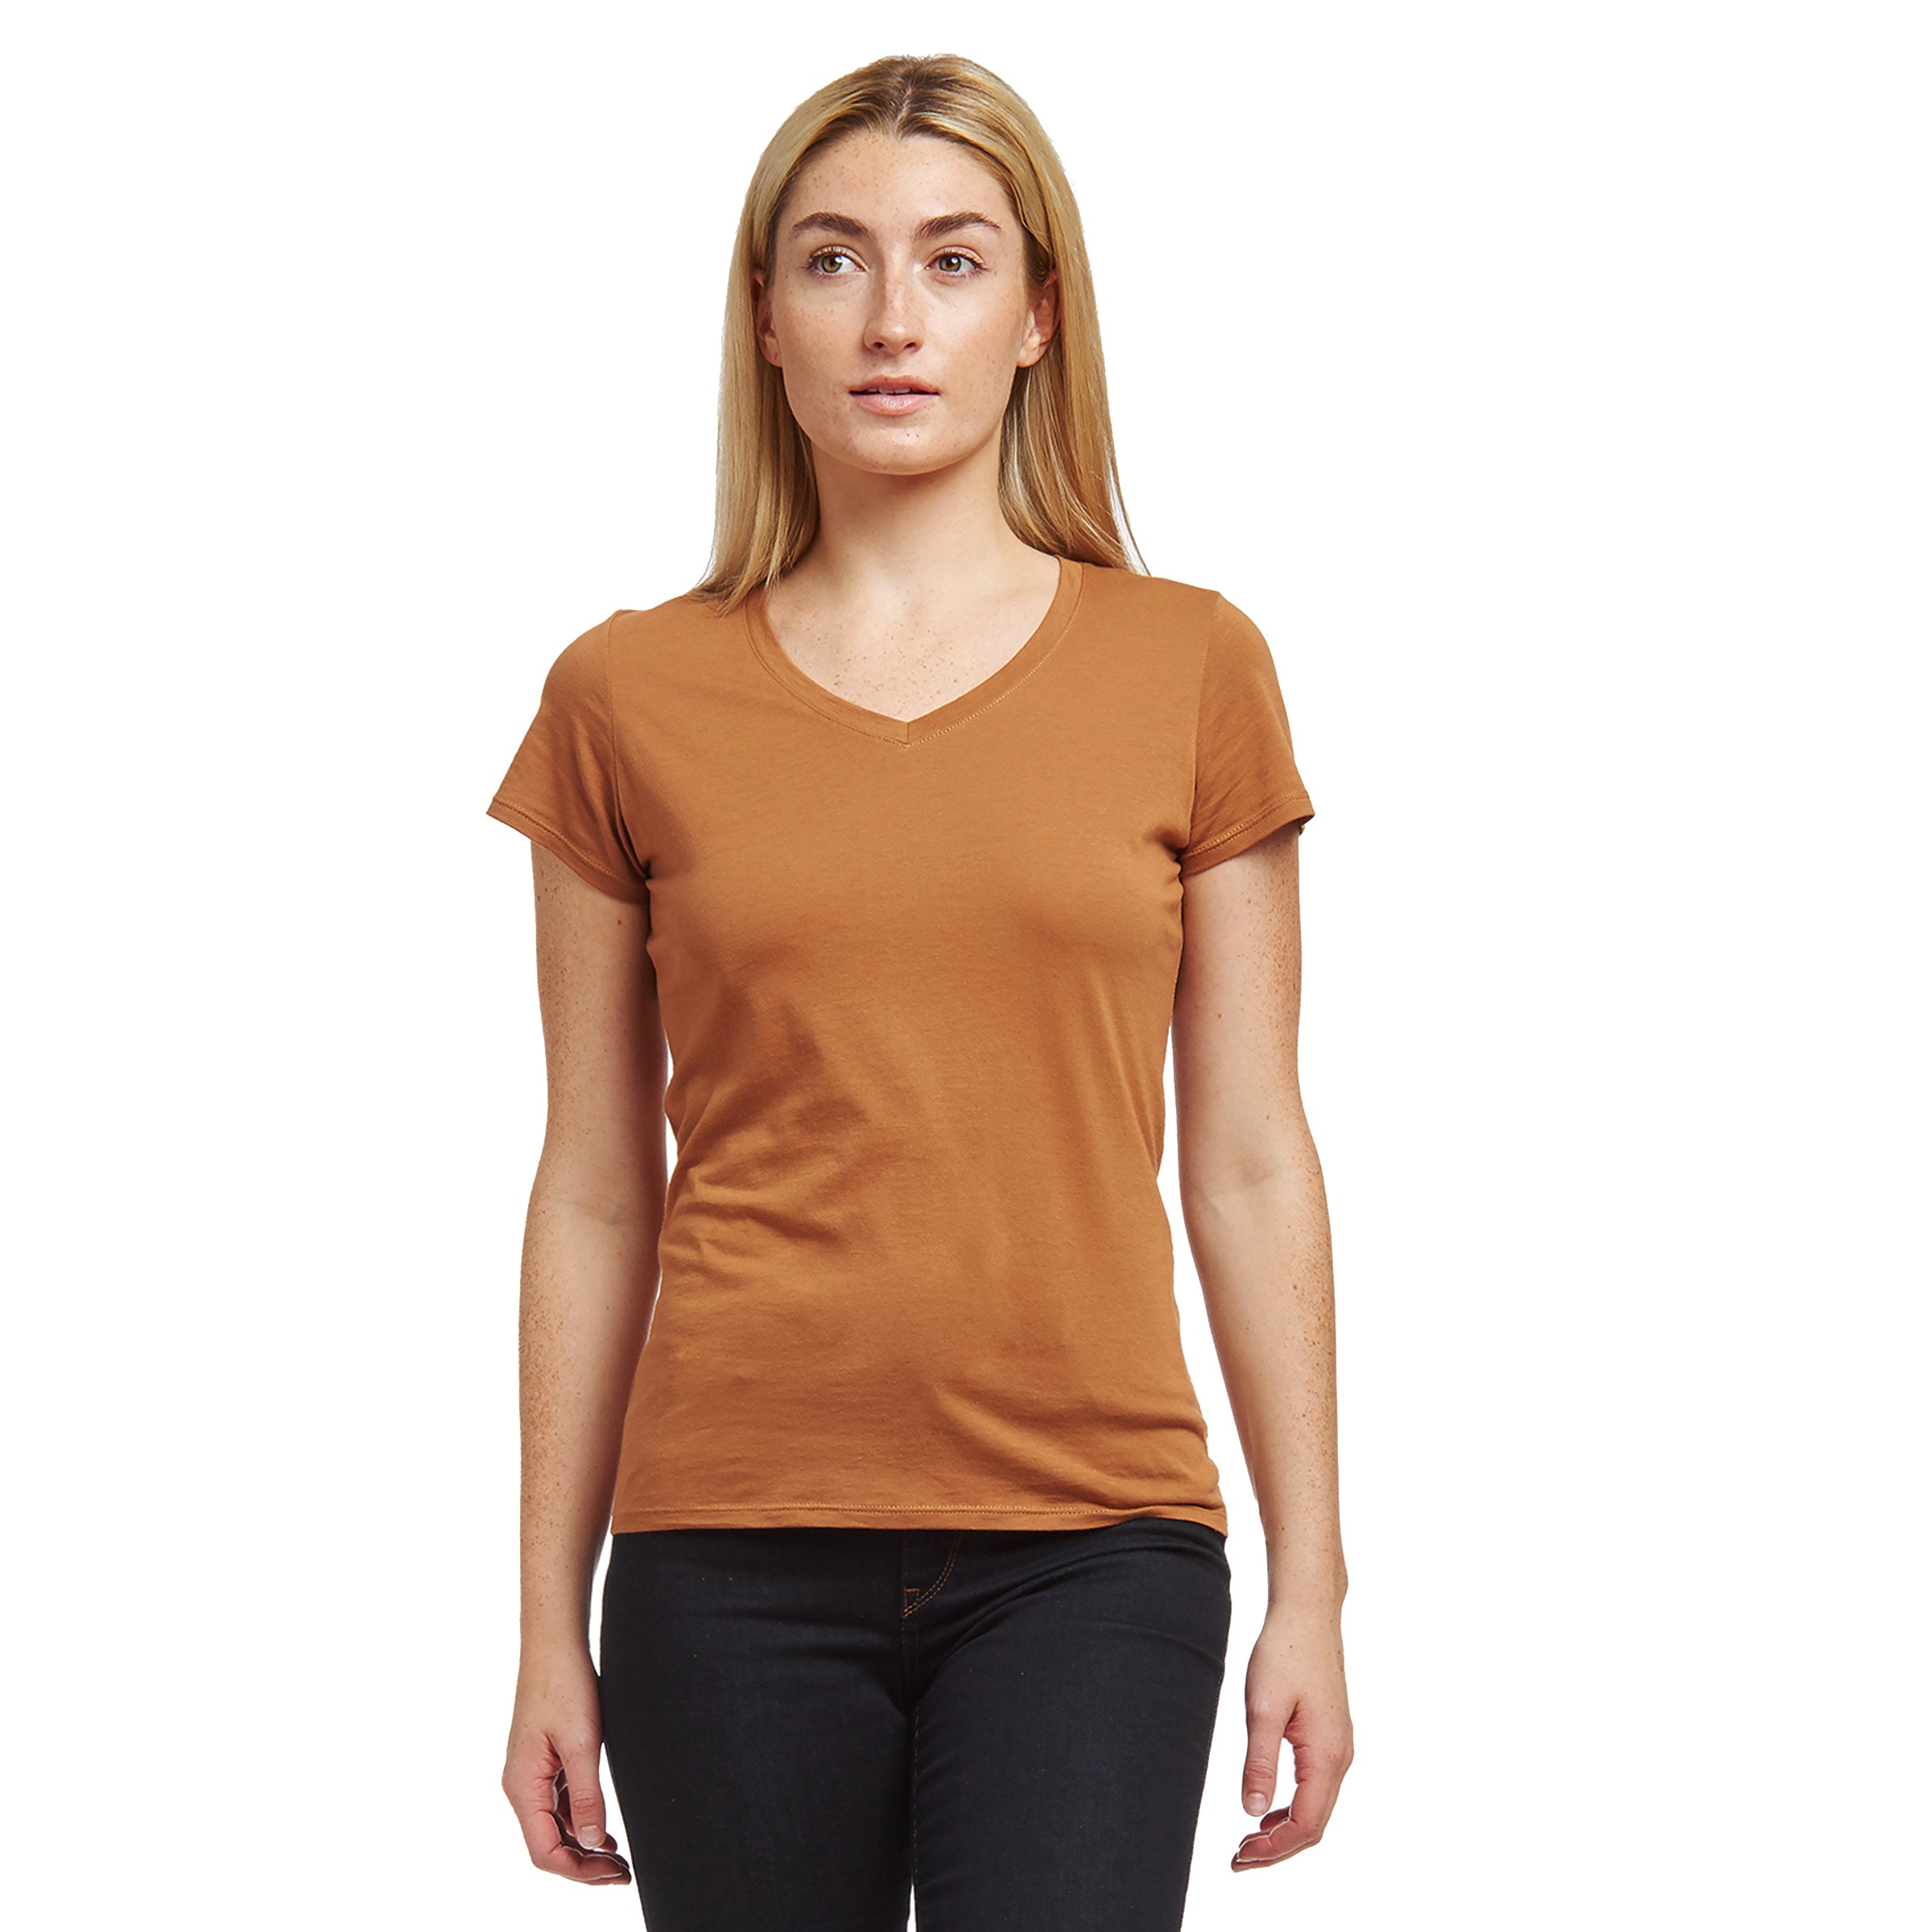 Women wearing Cardamom Fitted V-Neck Marcy Tee